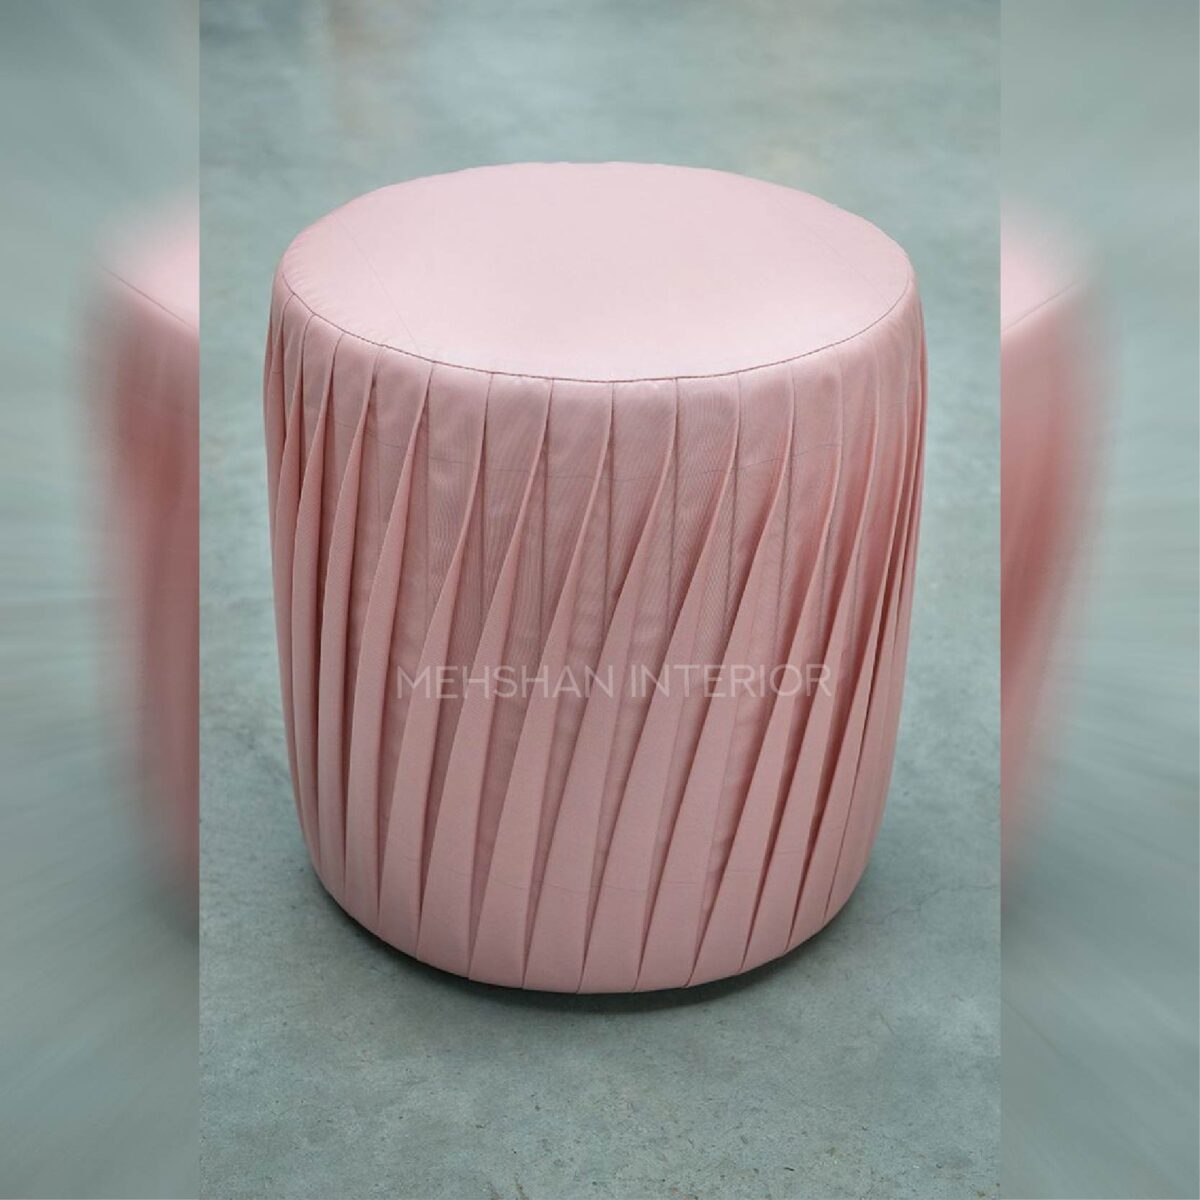 Quality Stool (Pink Edition)